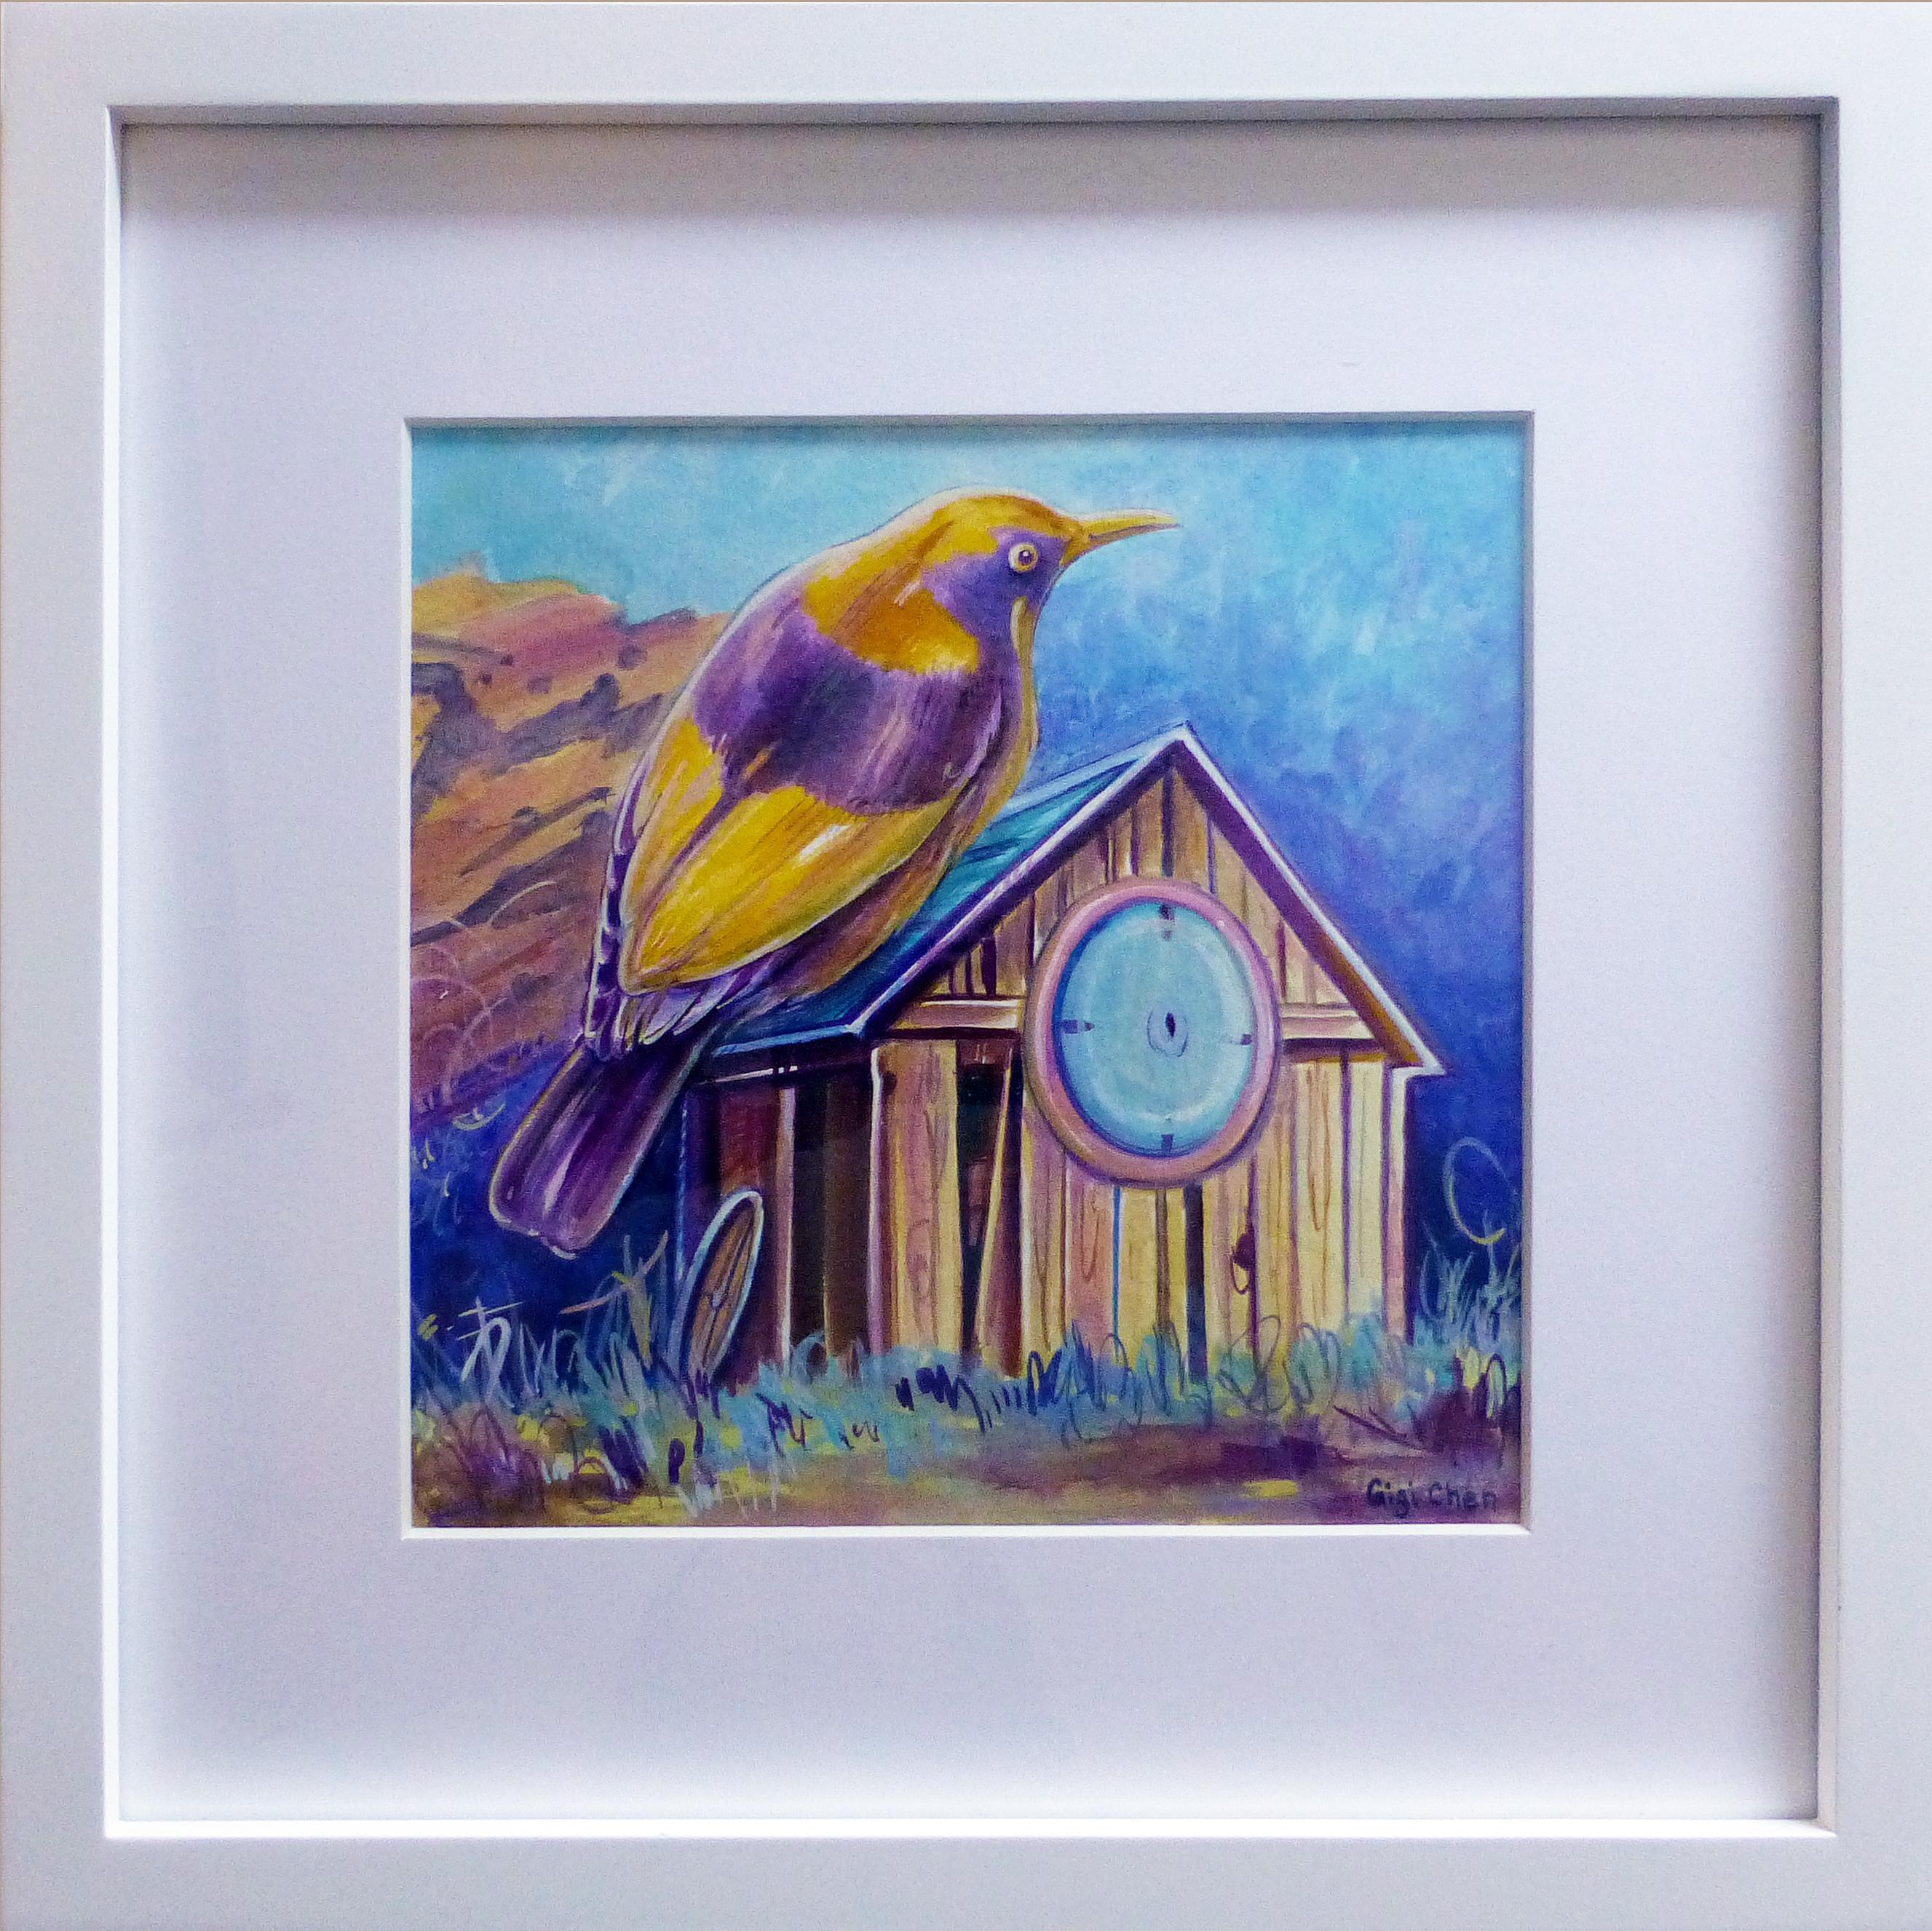 Settle In, yellow Bower bird, landscape drawing, house, framed work on paper - Art by Gigi Chen